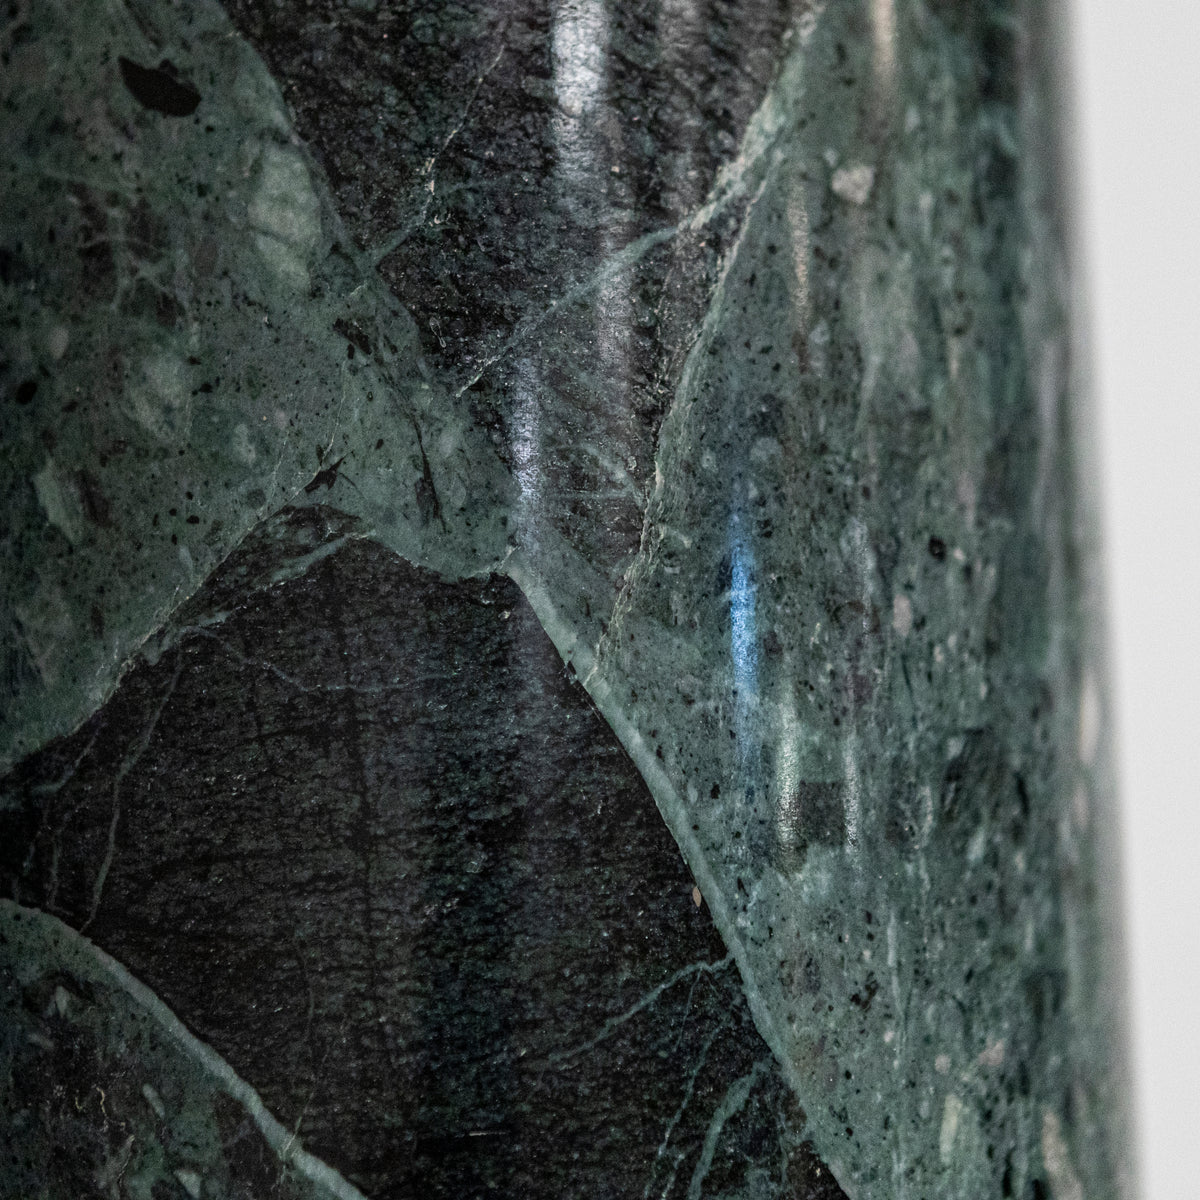 Pair of Grand Green Marble Columns (2 Pairs available) | The Architectural Forum